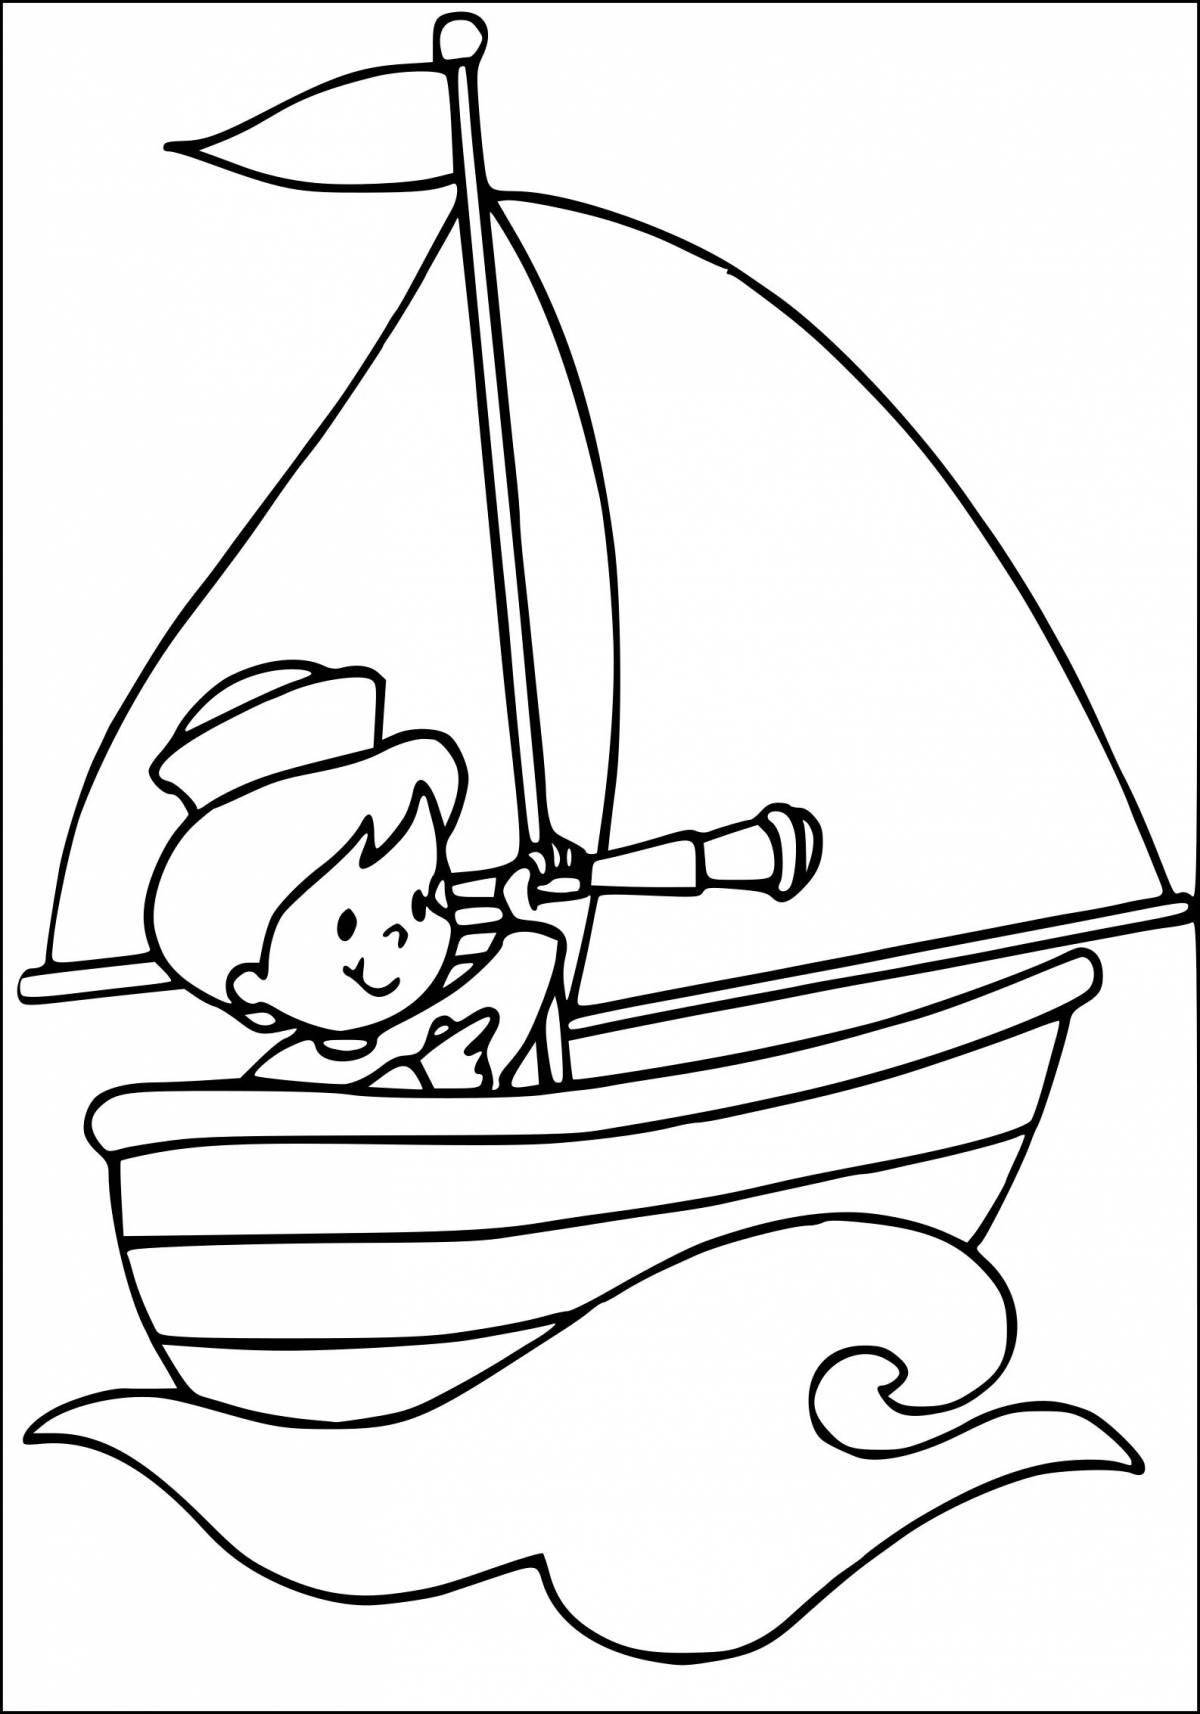 Shiny boat coloring page